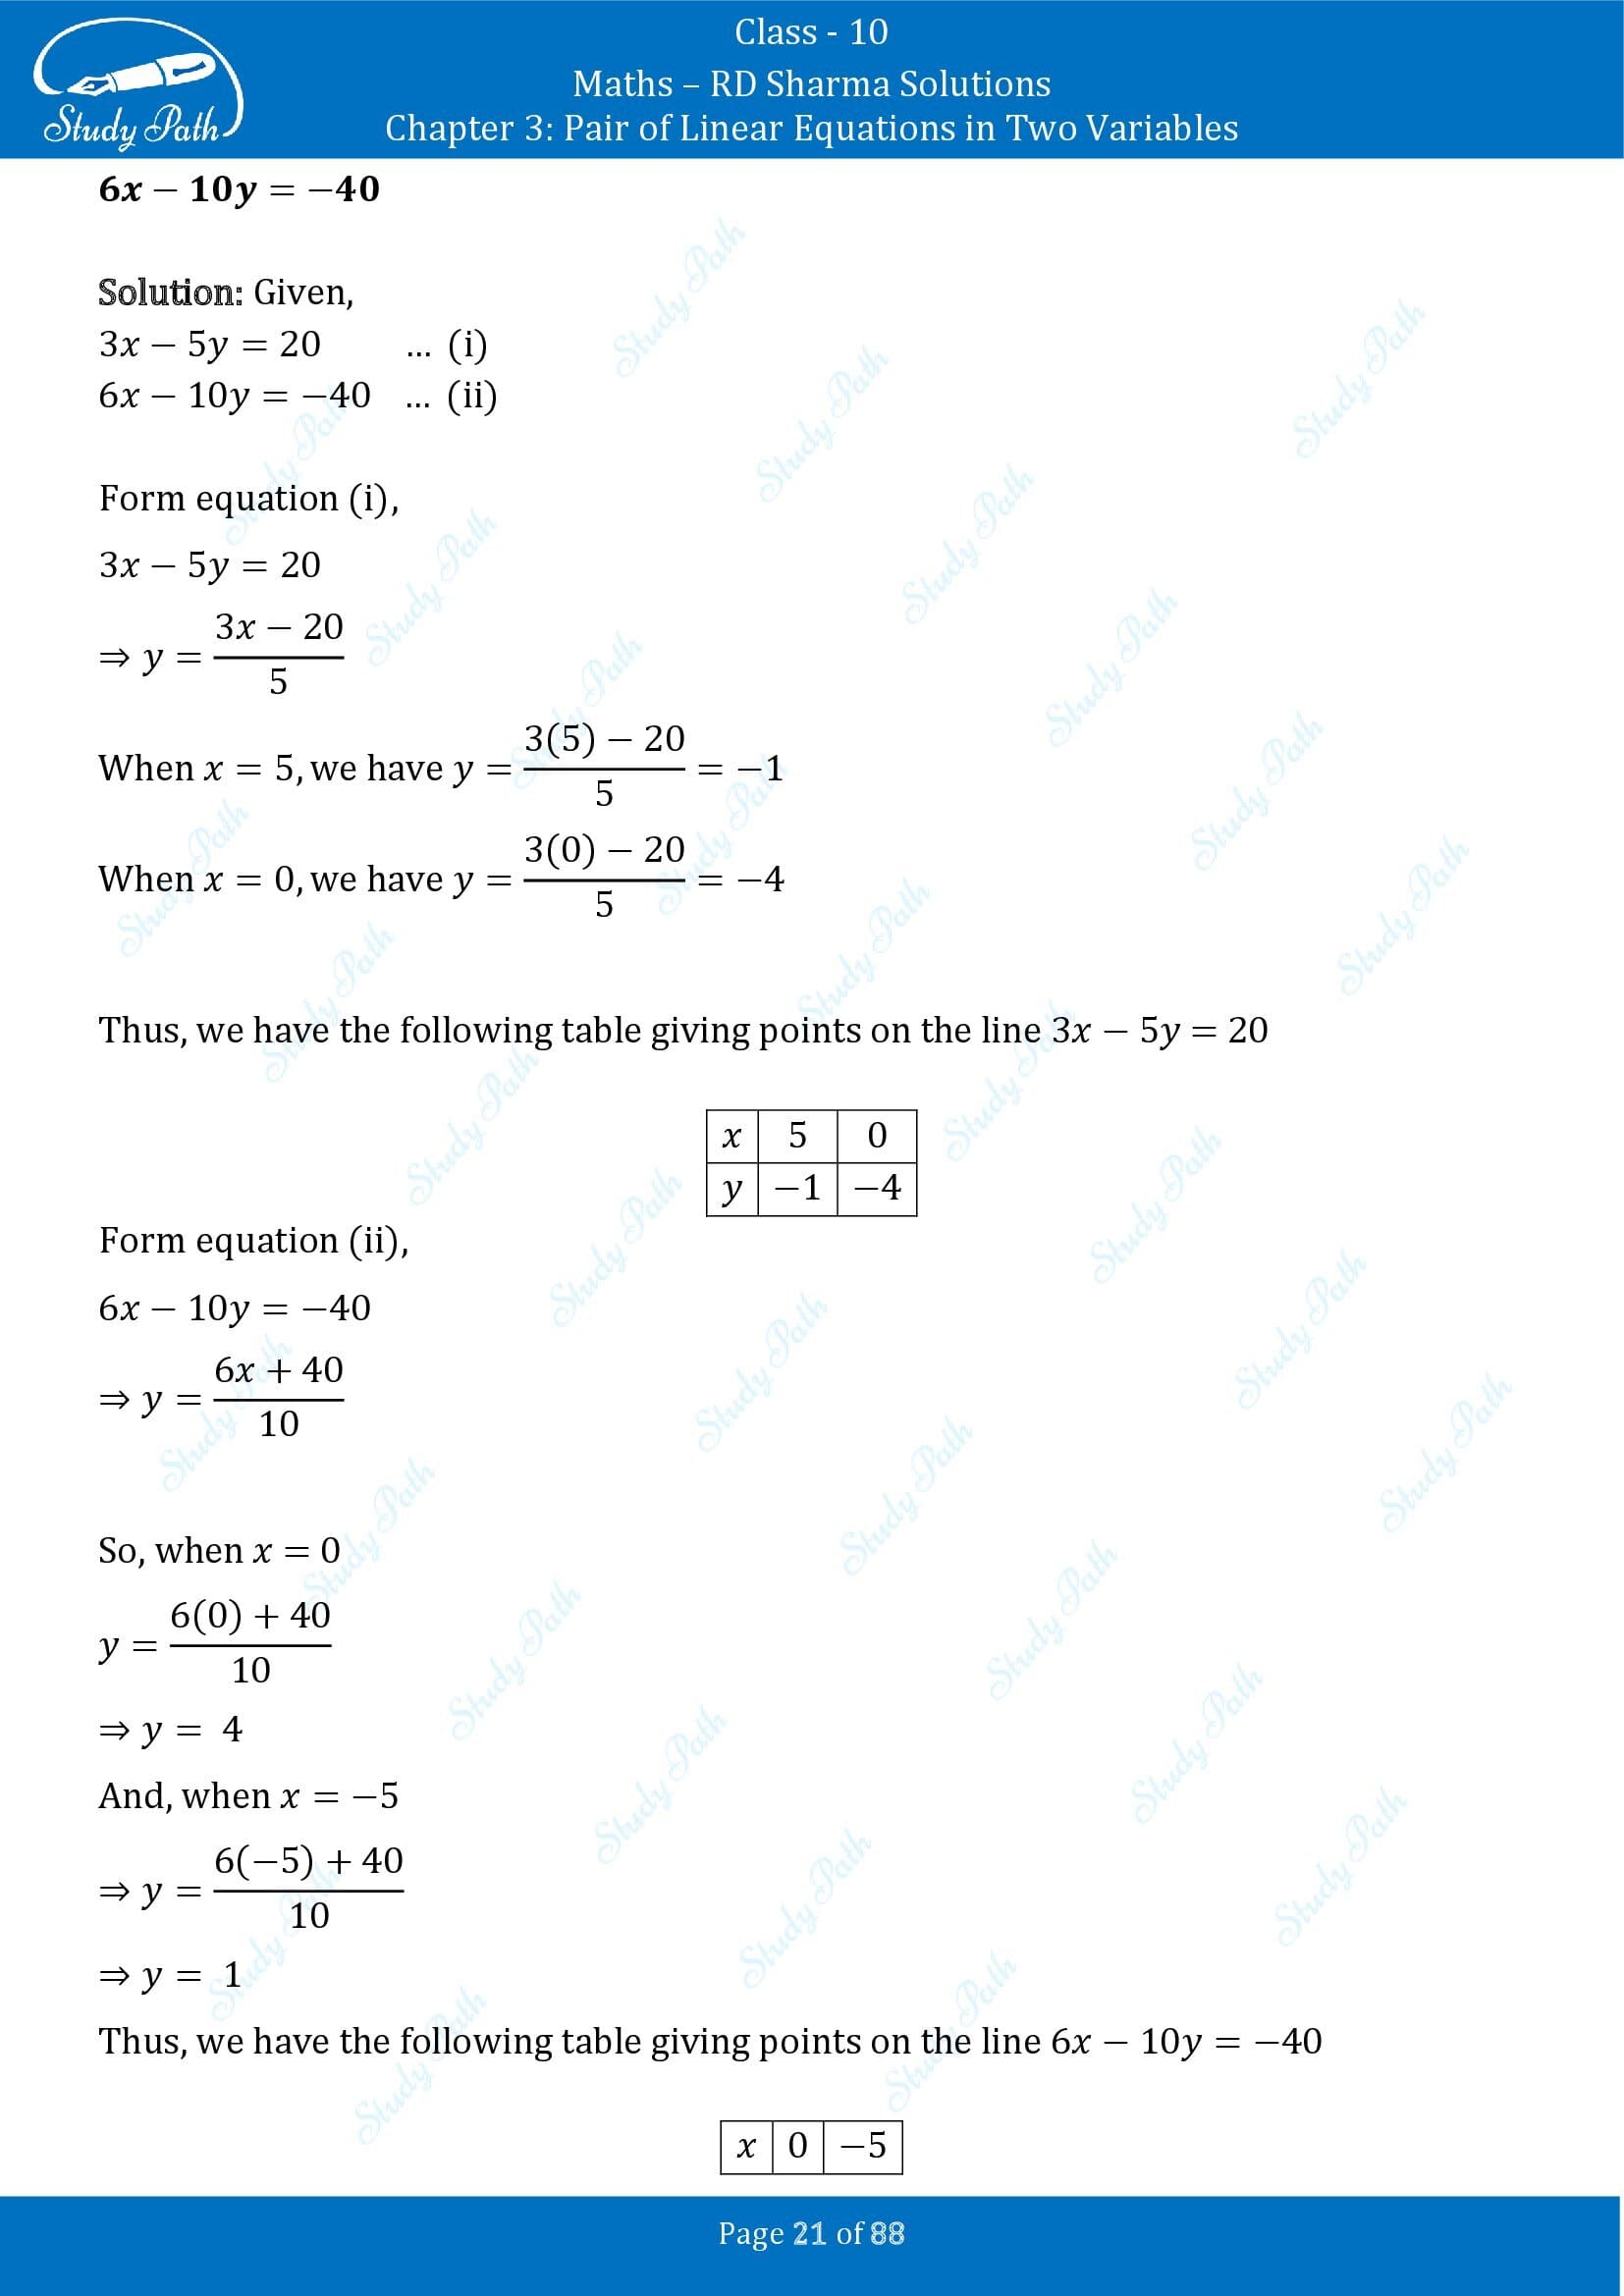 RD Sharma Solutions Class 10 Chapter 3 Pair of Linear Equations in Two Variables Exercise 3.2 00021